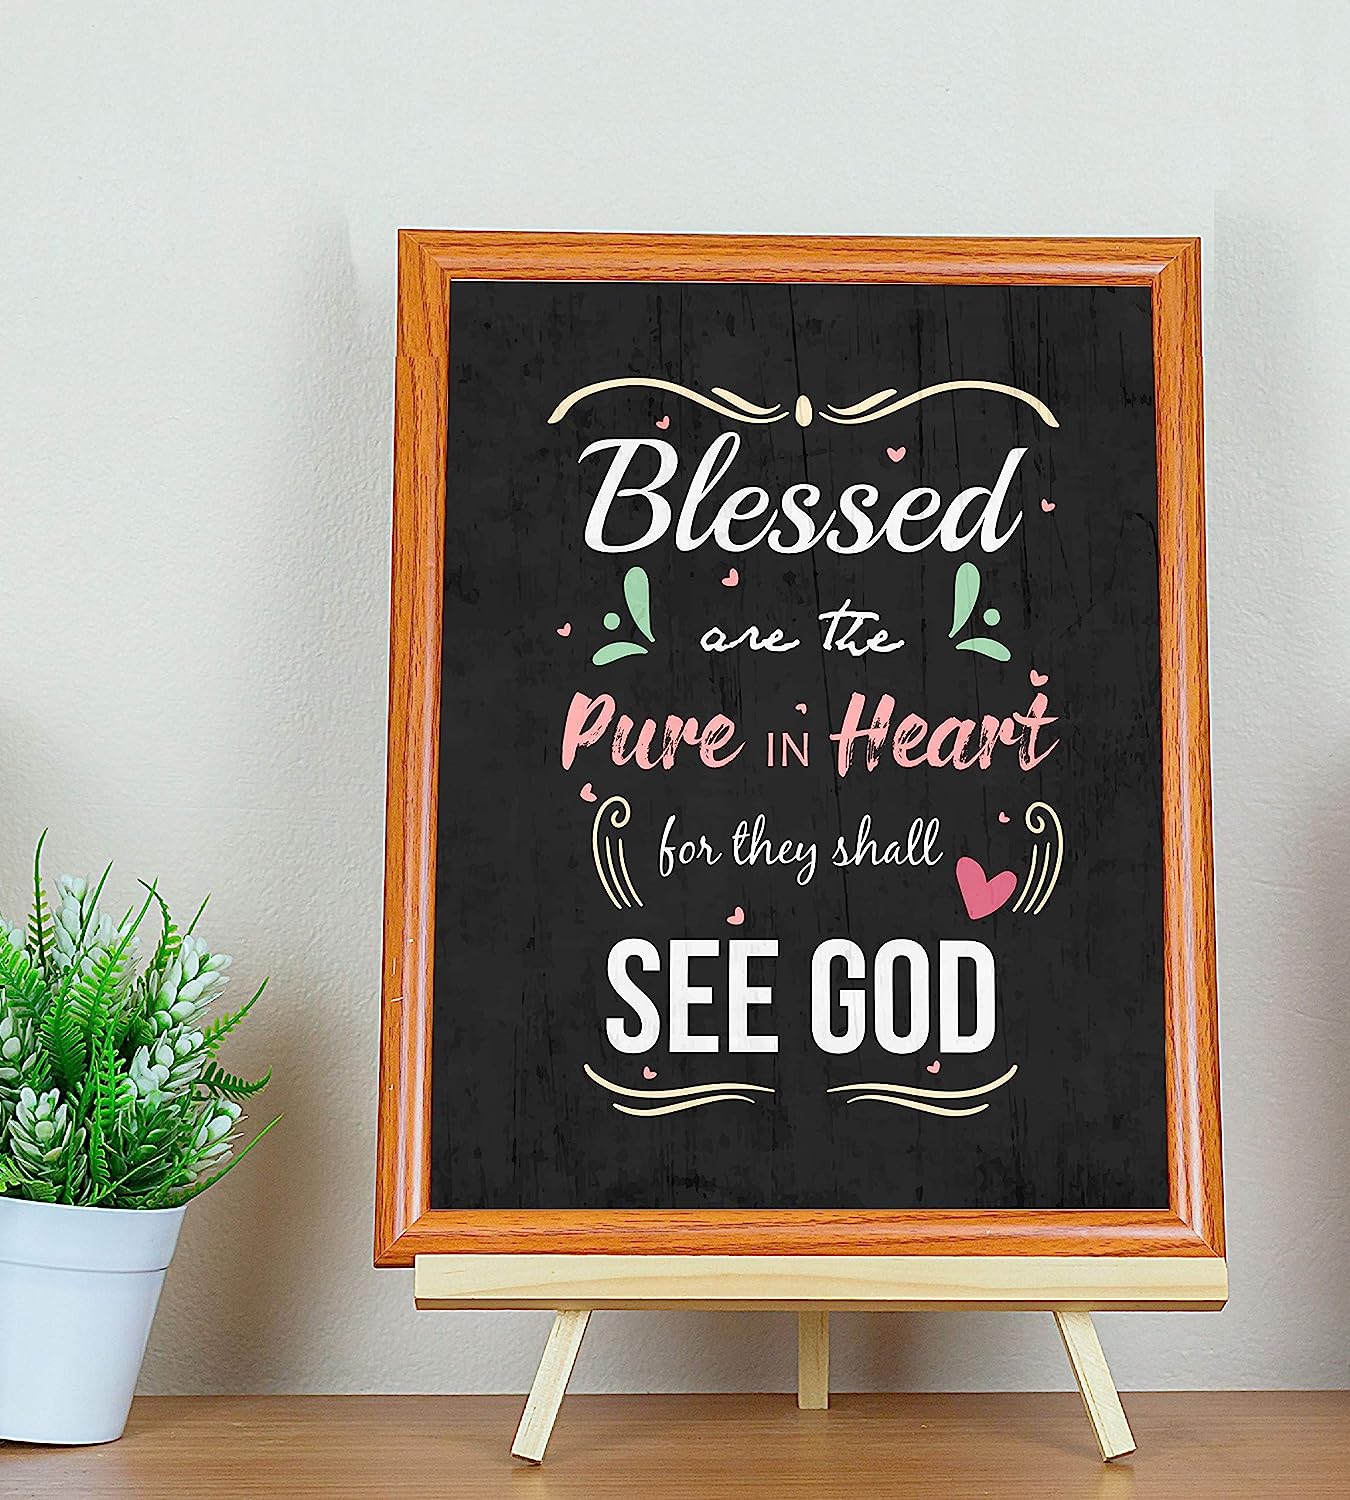 ?Blessed Are the Pure in Heart" Bible Verse Wall Art-8 x 10" Scripture Poster Print w/Distressed Wood Design-Ready to Frame. Inspirational Christian Decor for Home-Office-Church. Great Gift of Faith!